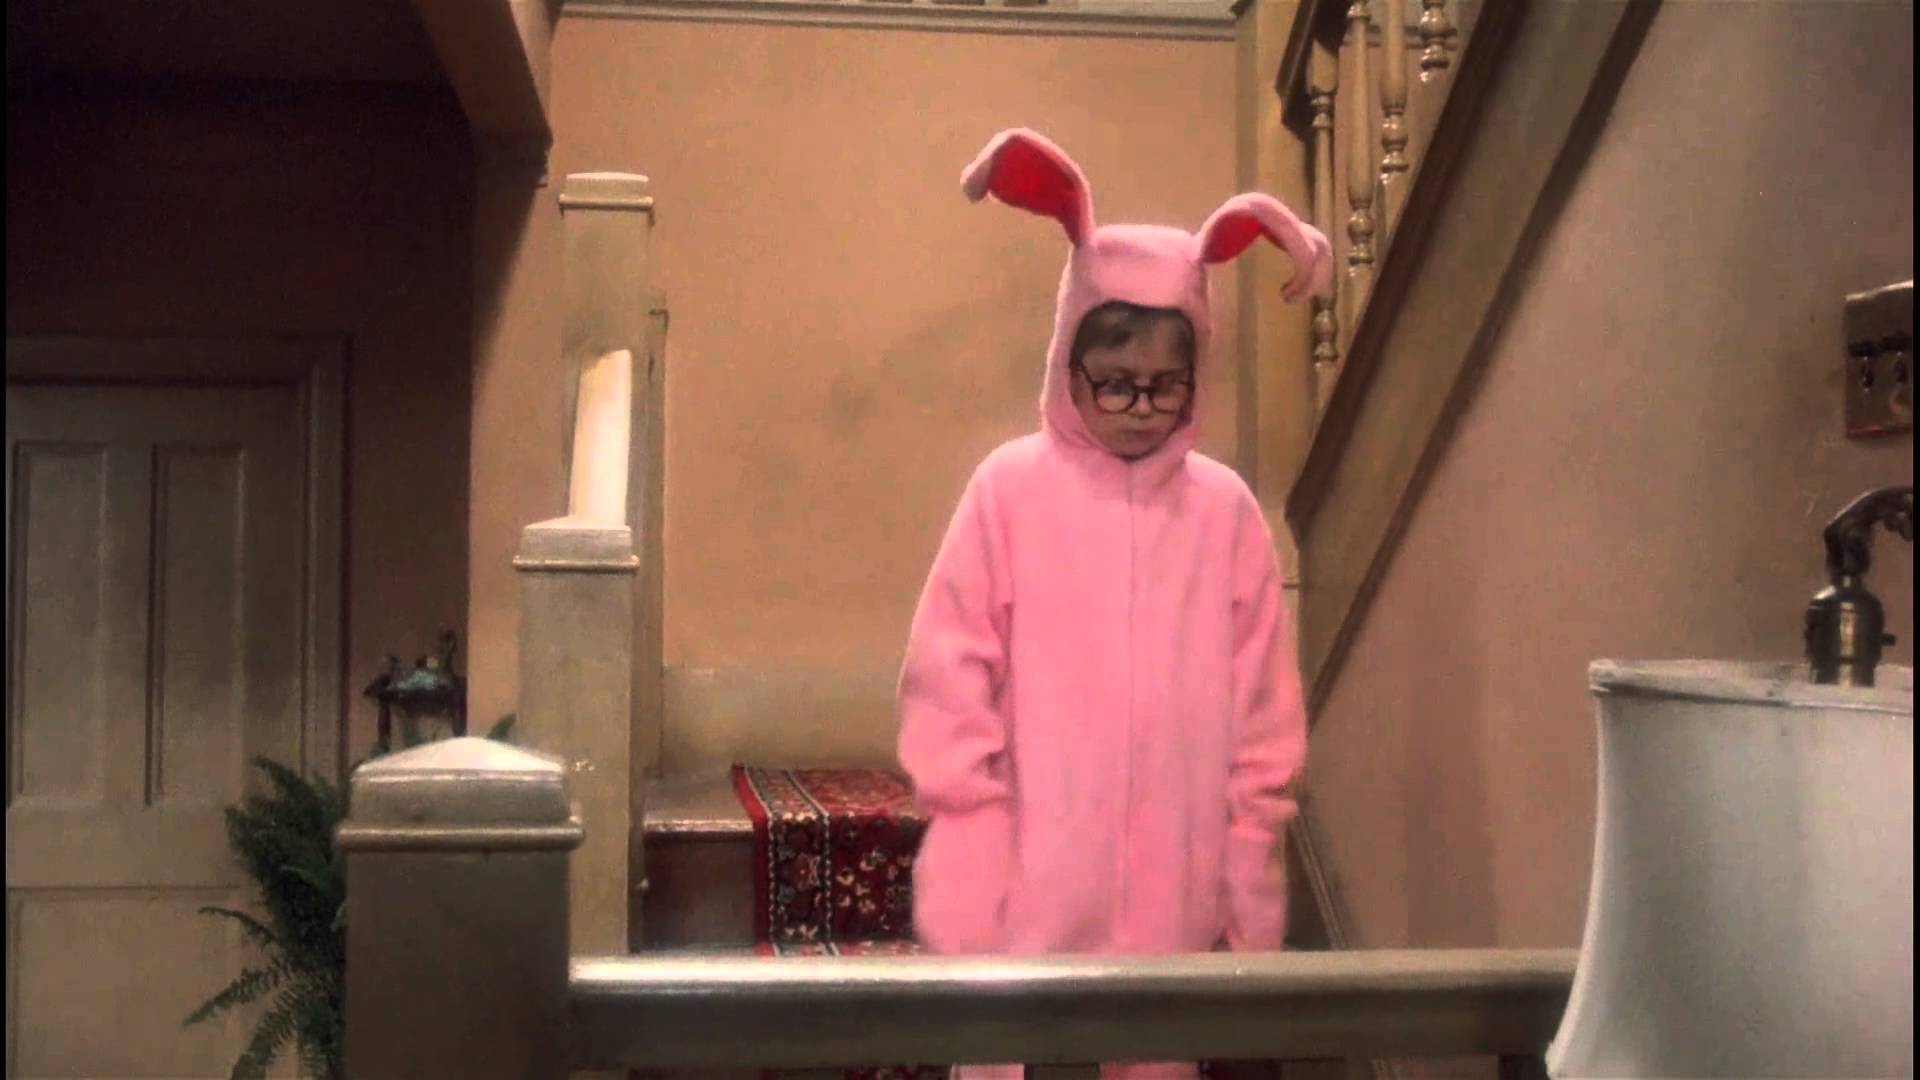 Bidding Opens Tomorrow For A Chance To Stay In The Cleveland House From ‘A Christmas Story’